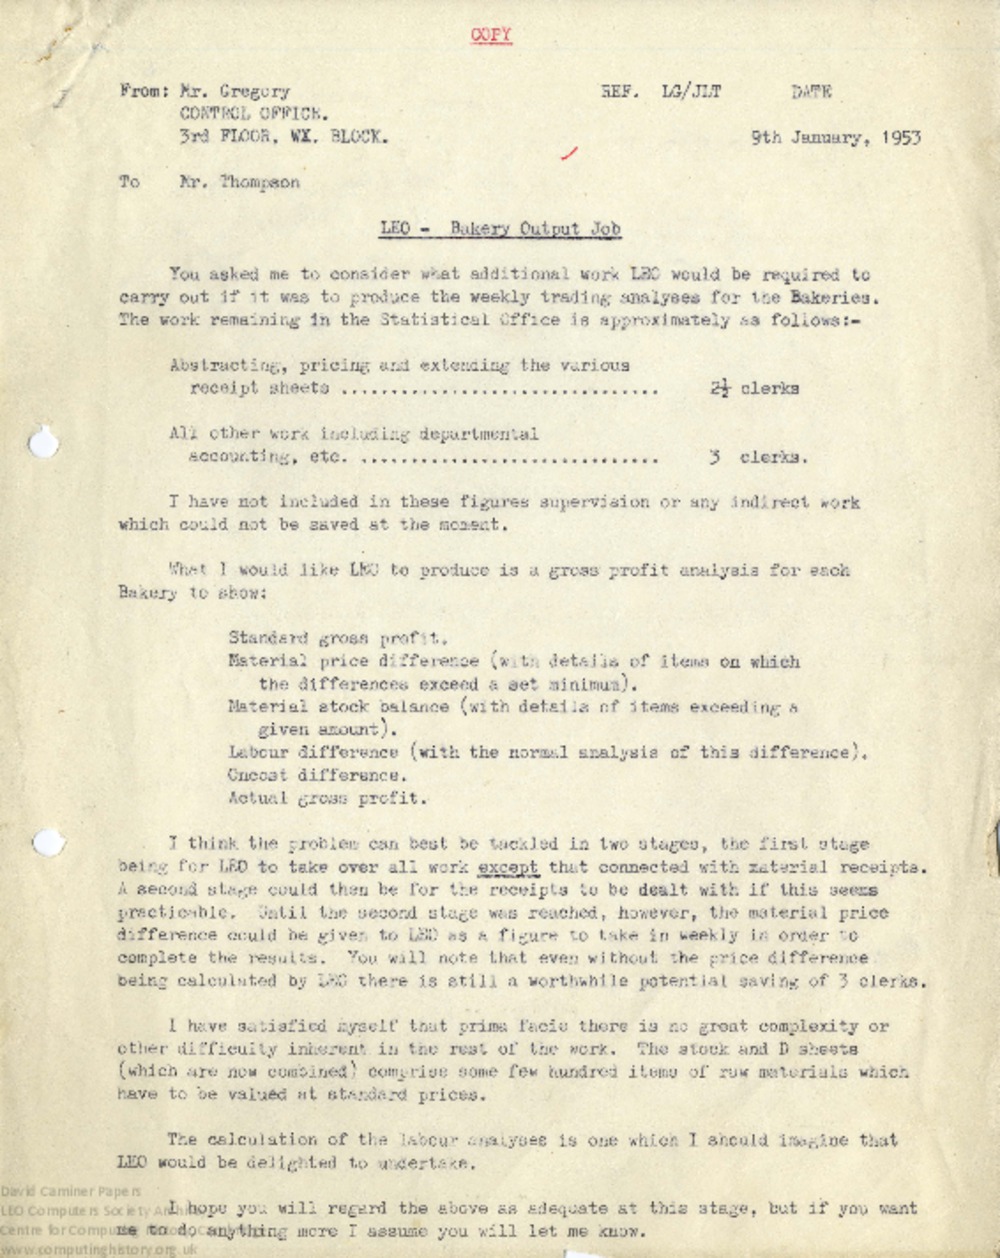 Article: Memo regarding work to be carried out by LEO, 9th January 1953 (Copy)